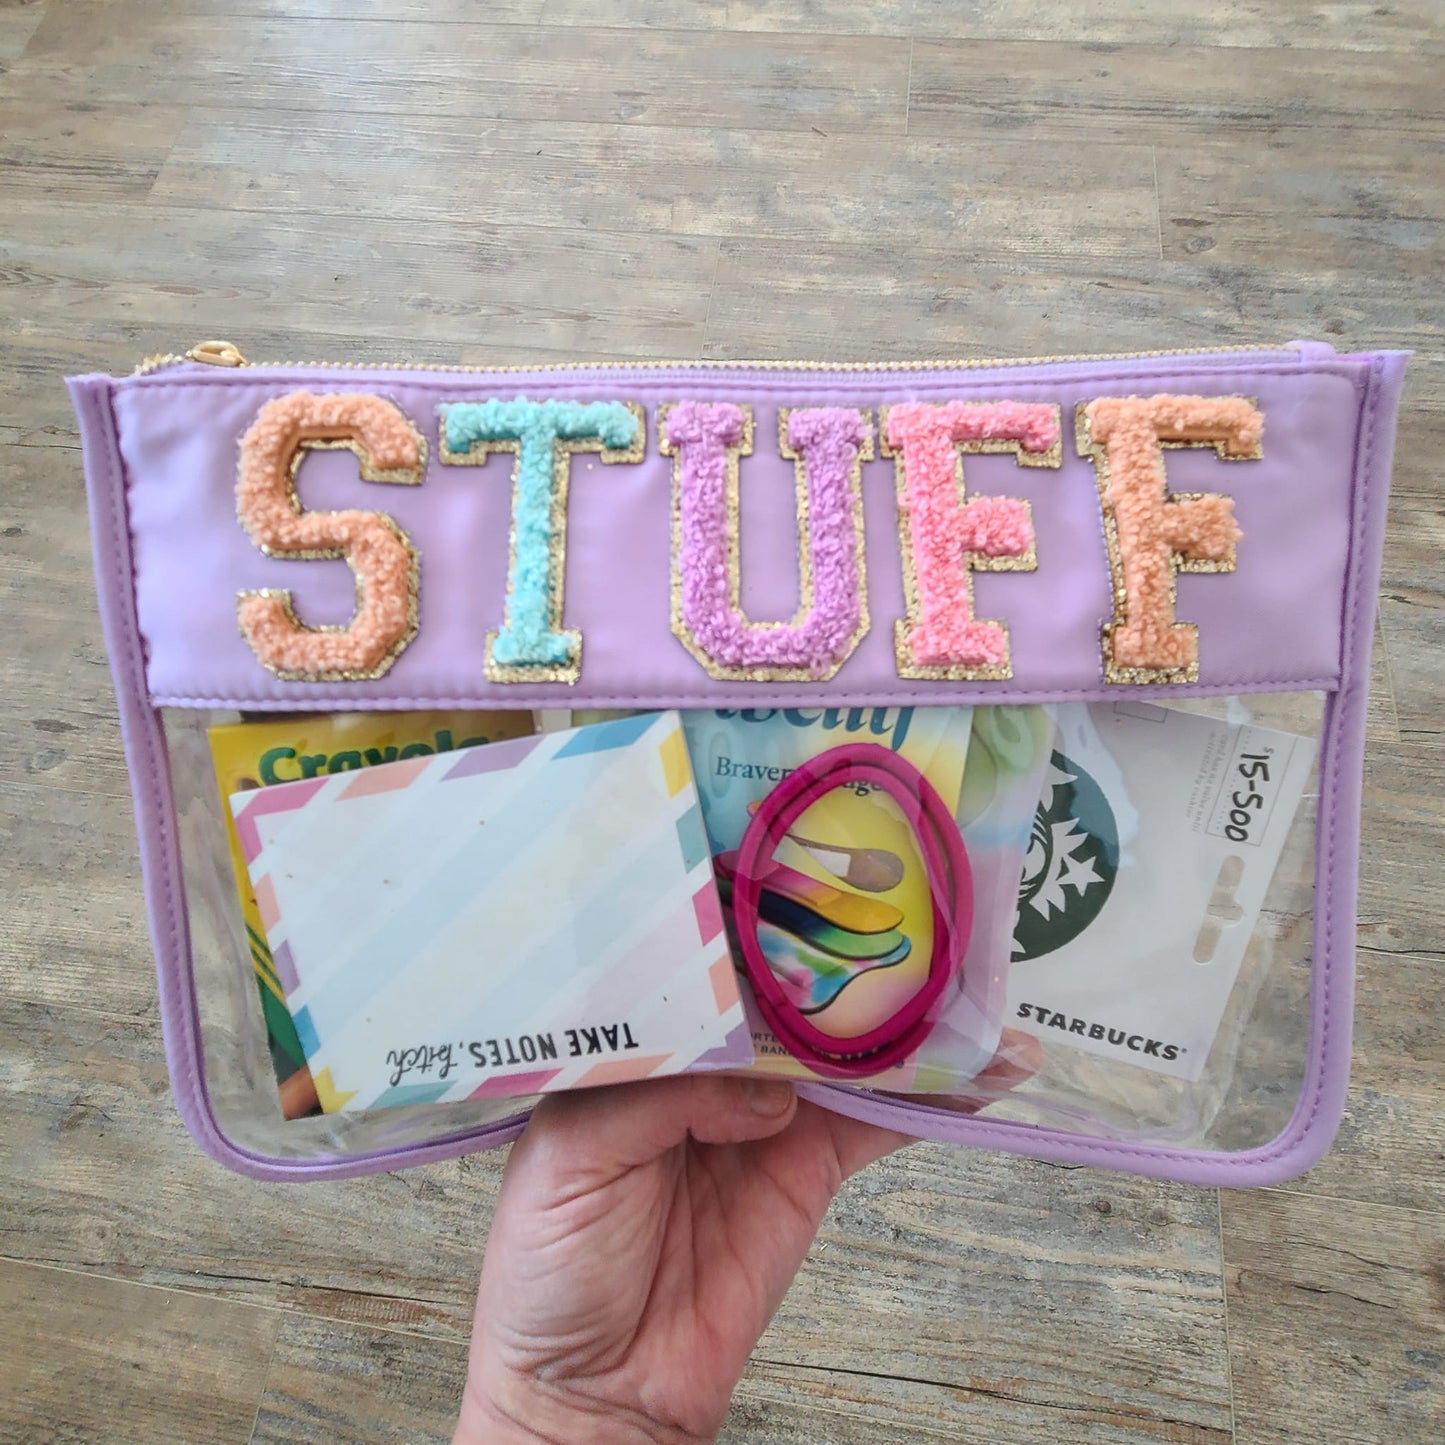 hand holding clear nylon bag with purple trim, chenille patches that spell "stuff", and filled with stuff.